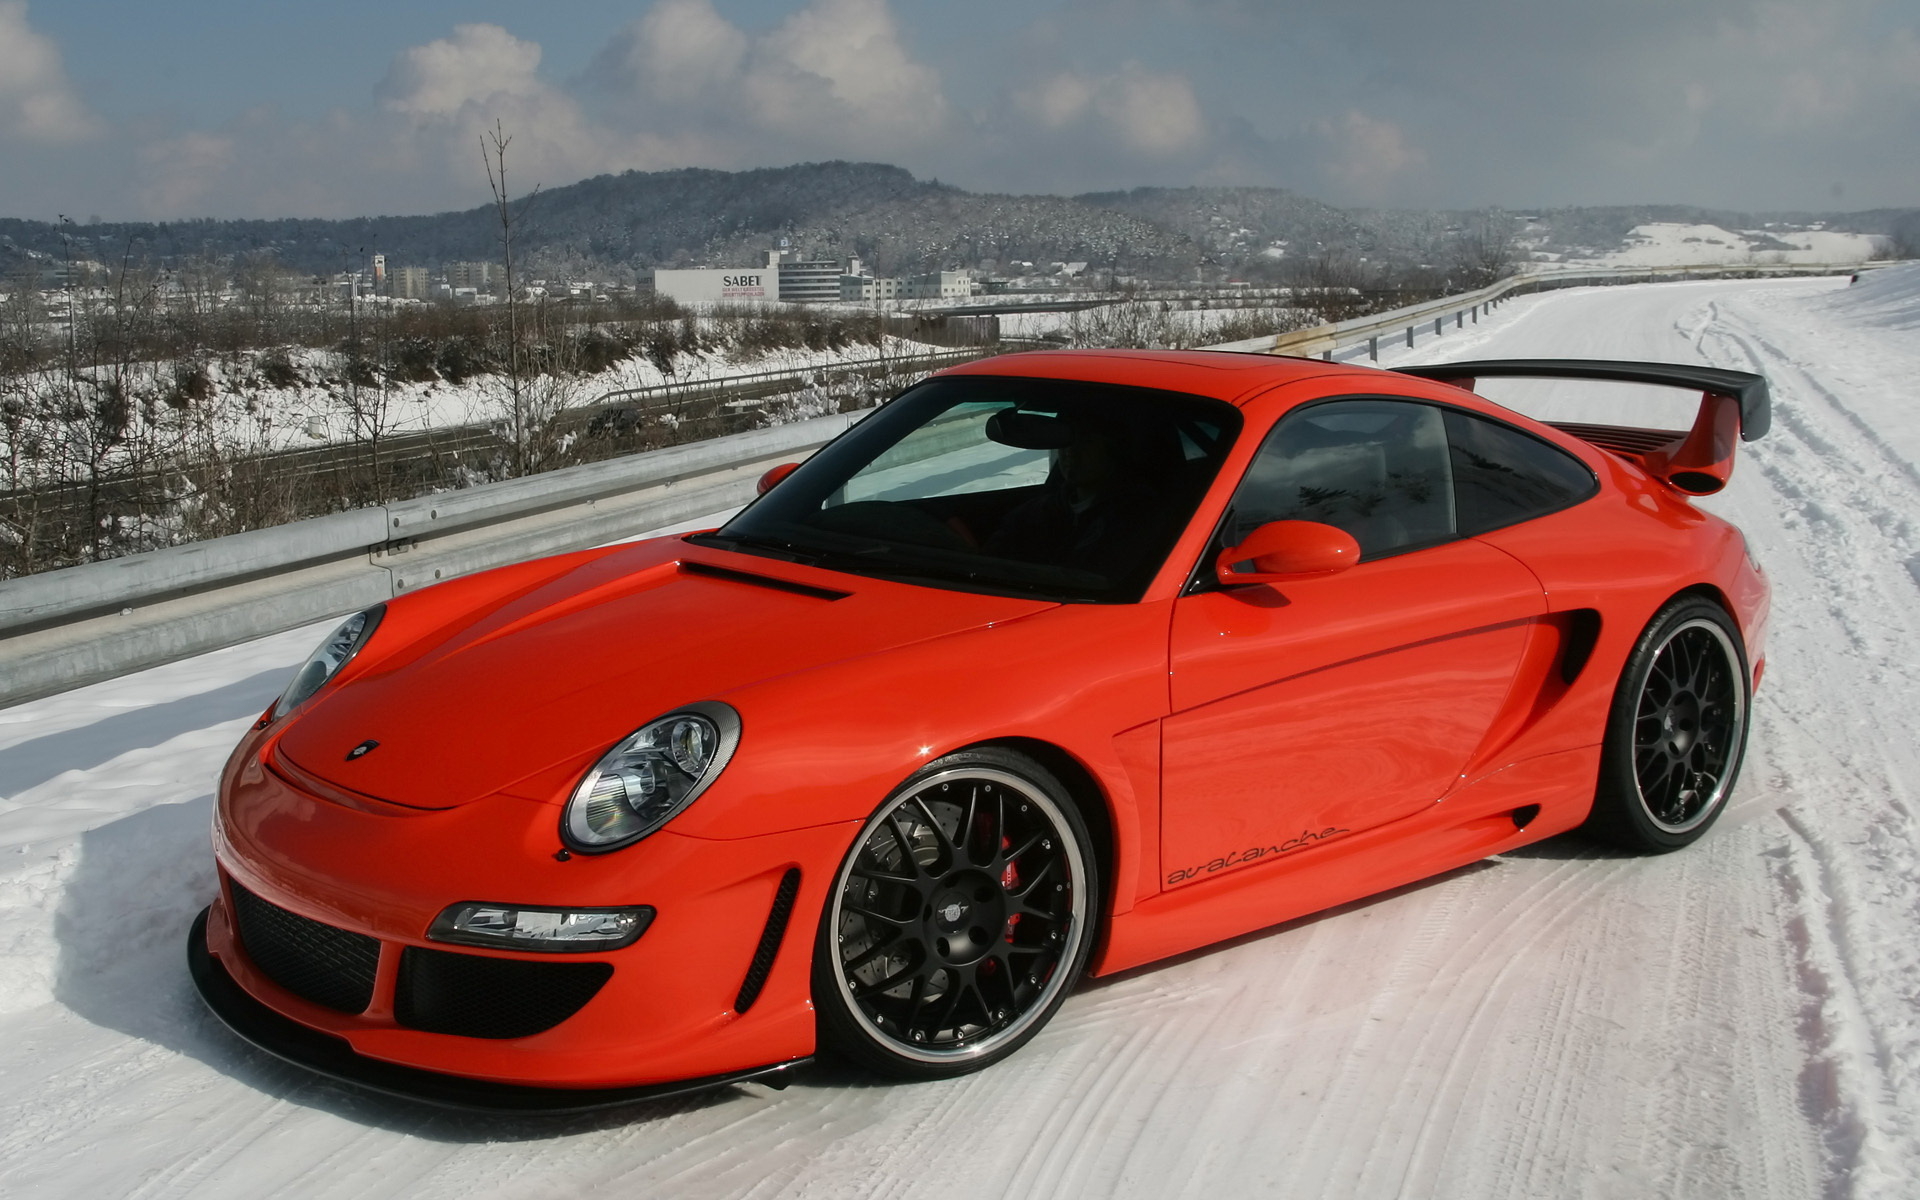 Gemballa Avalanche Wallpapers